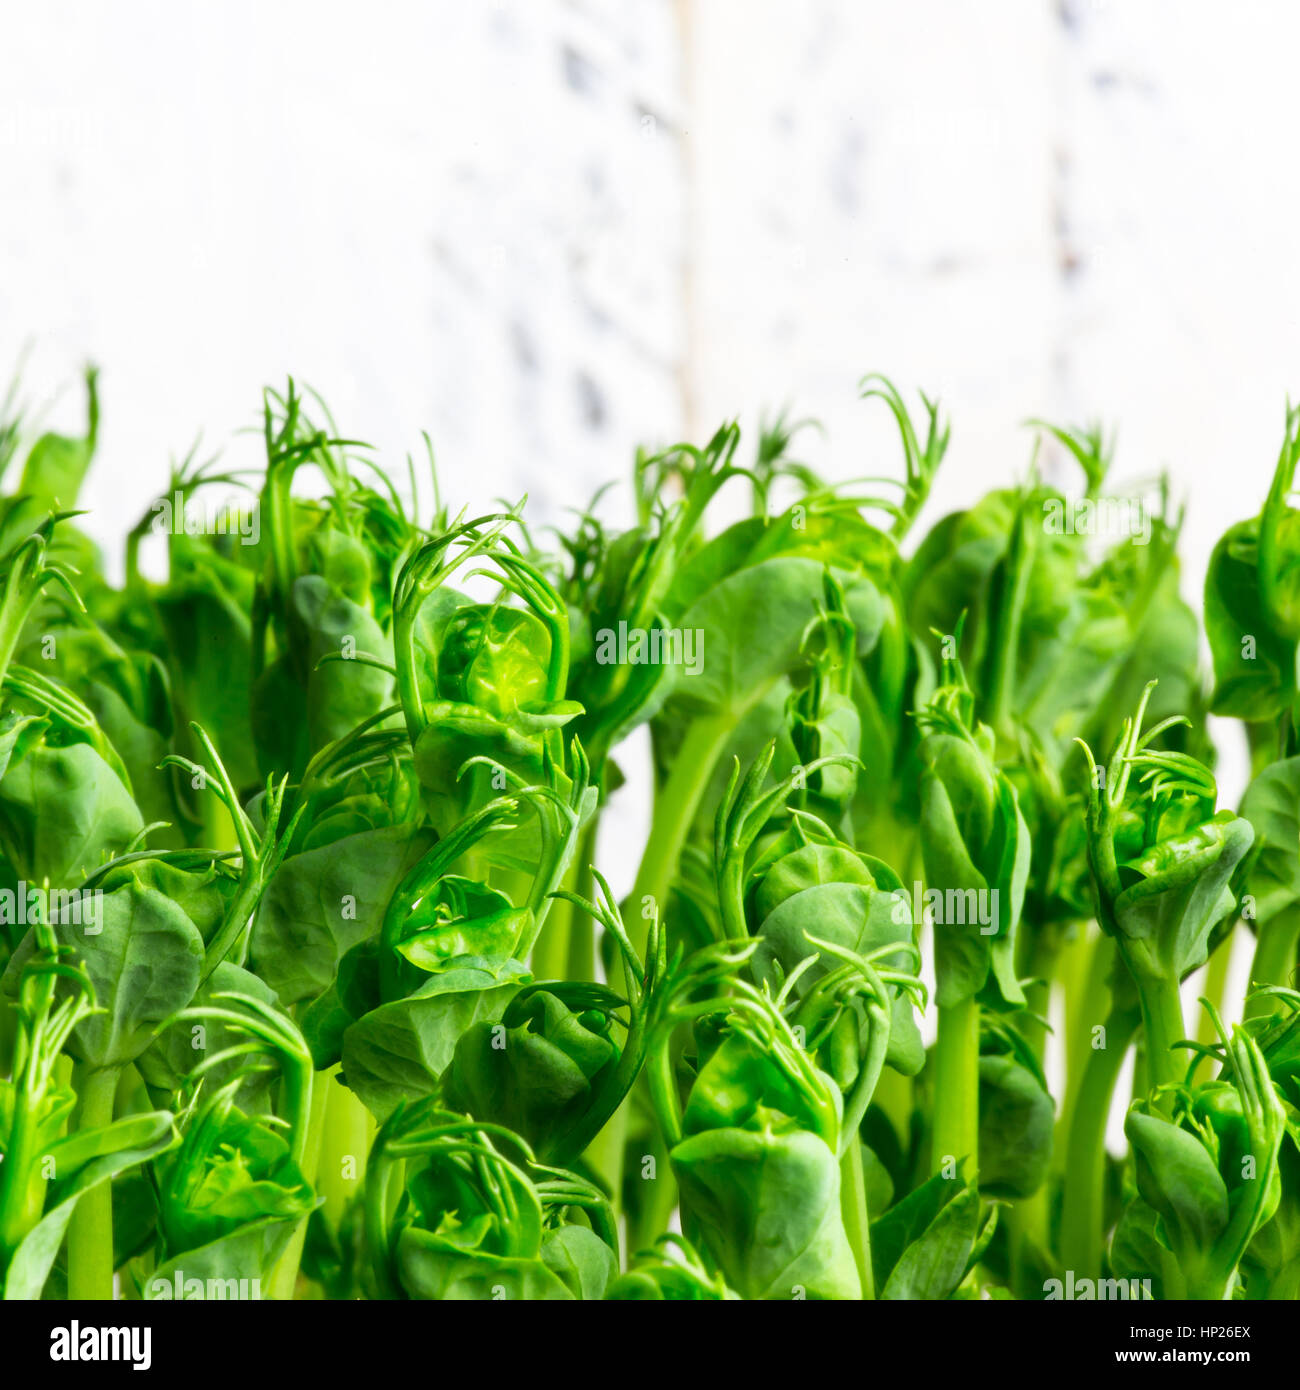 Pea green young tendril plants shoots in growing container, seedlings against light background Stock Photo